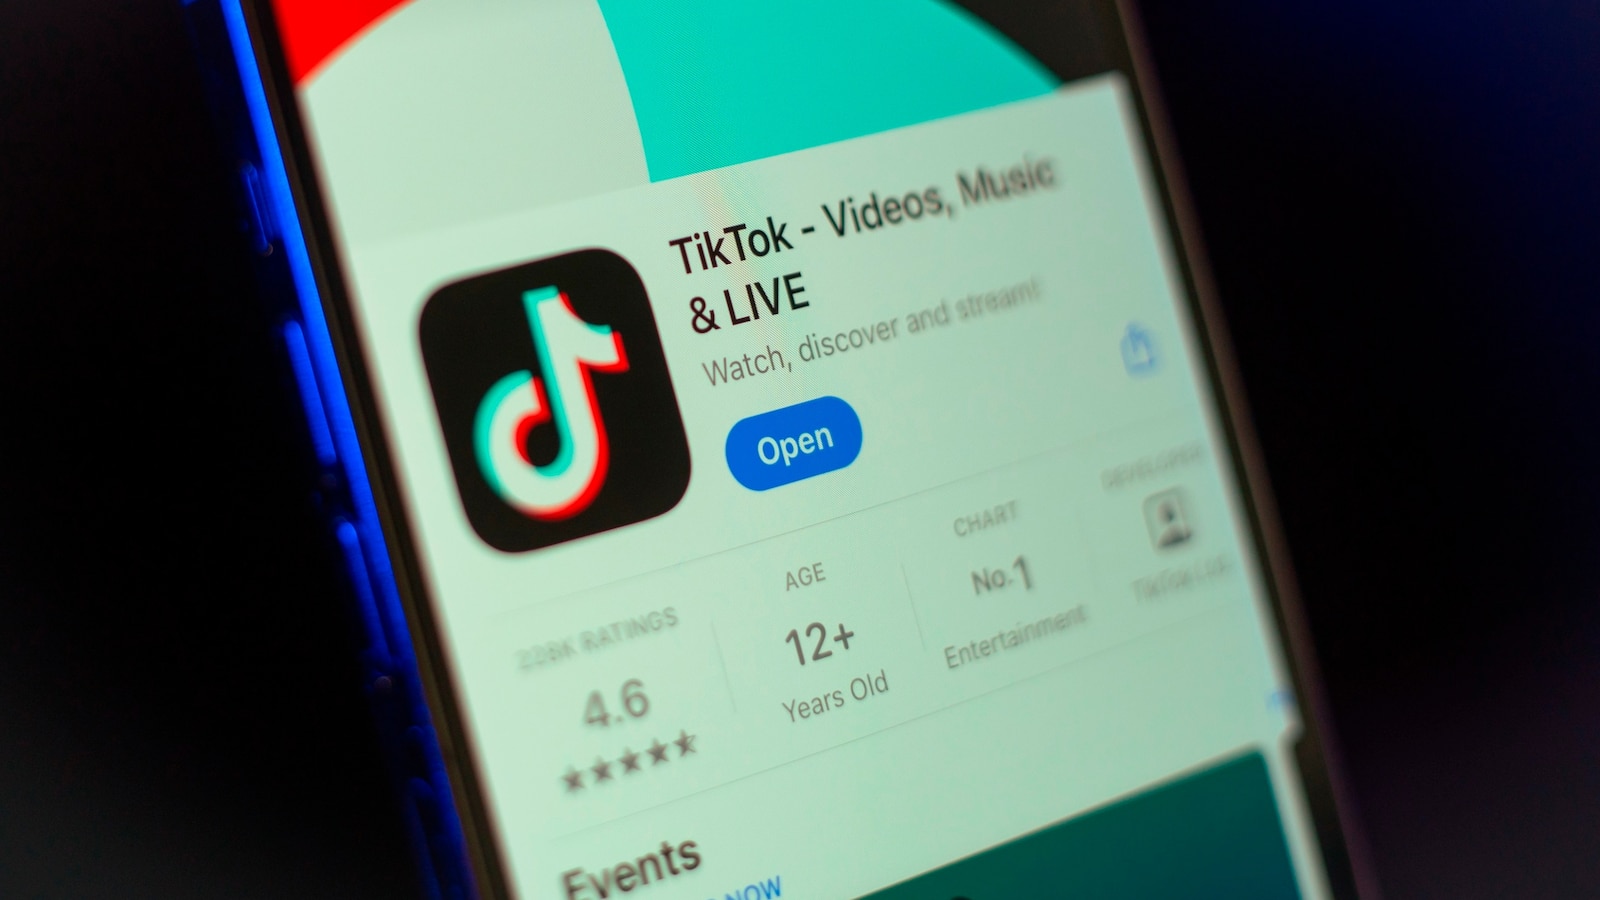 TikTok sues to block potential ban. Can it win? [Video]